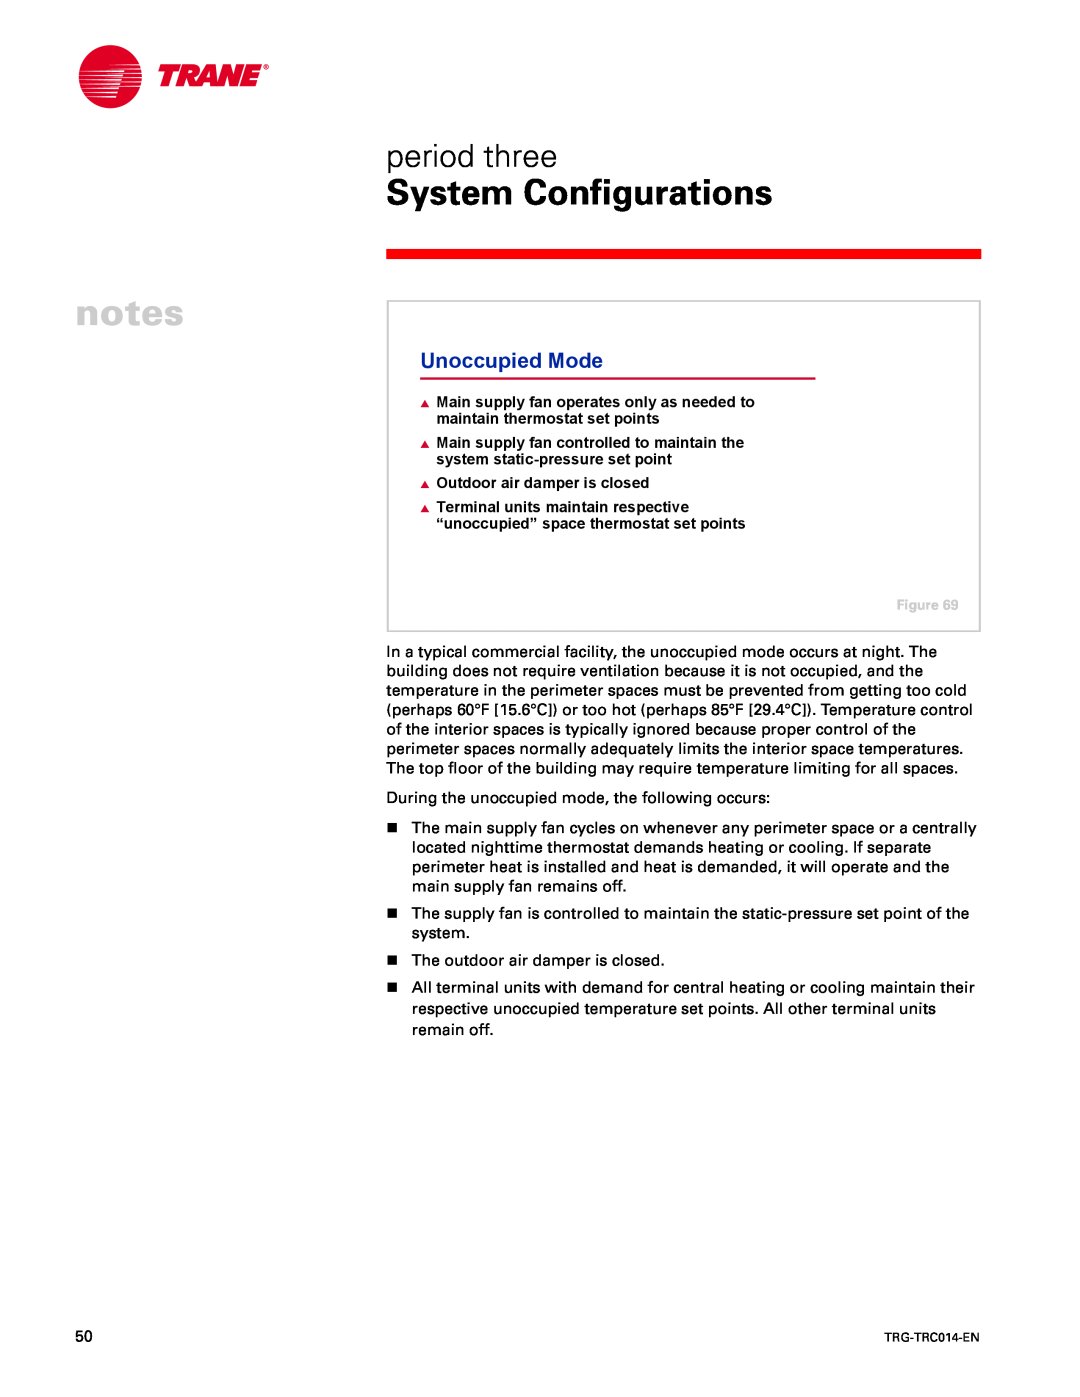 Trane TRG-TRC014-EN manual Unoccupied Mode, System Configurations, period three 